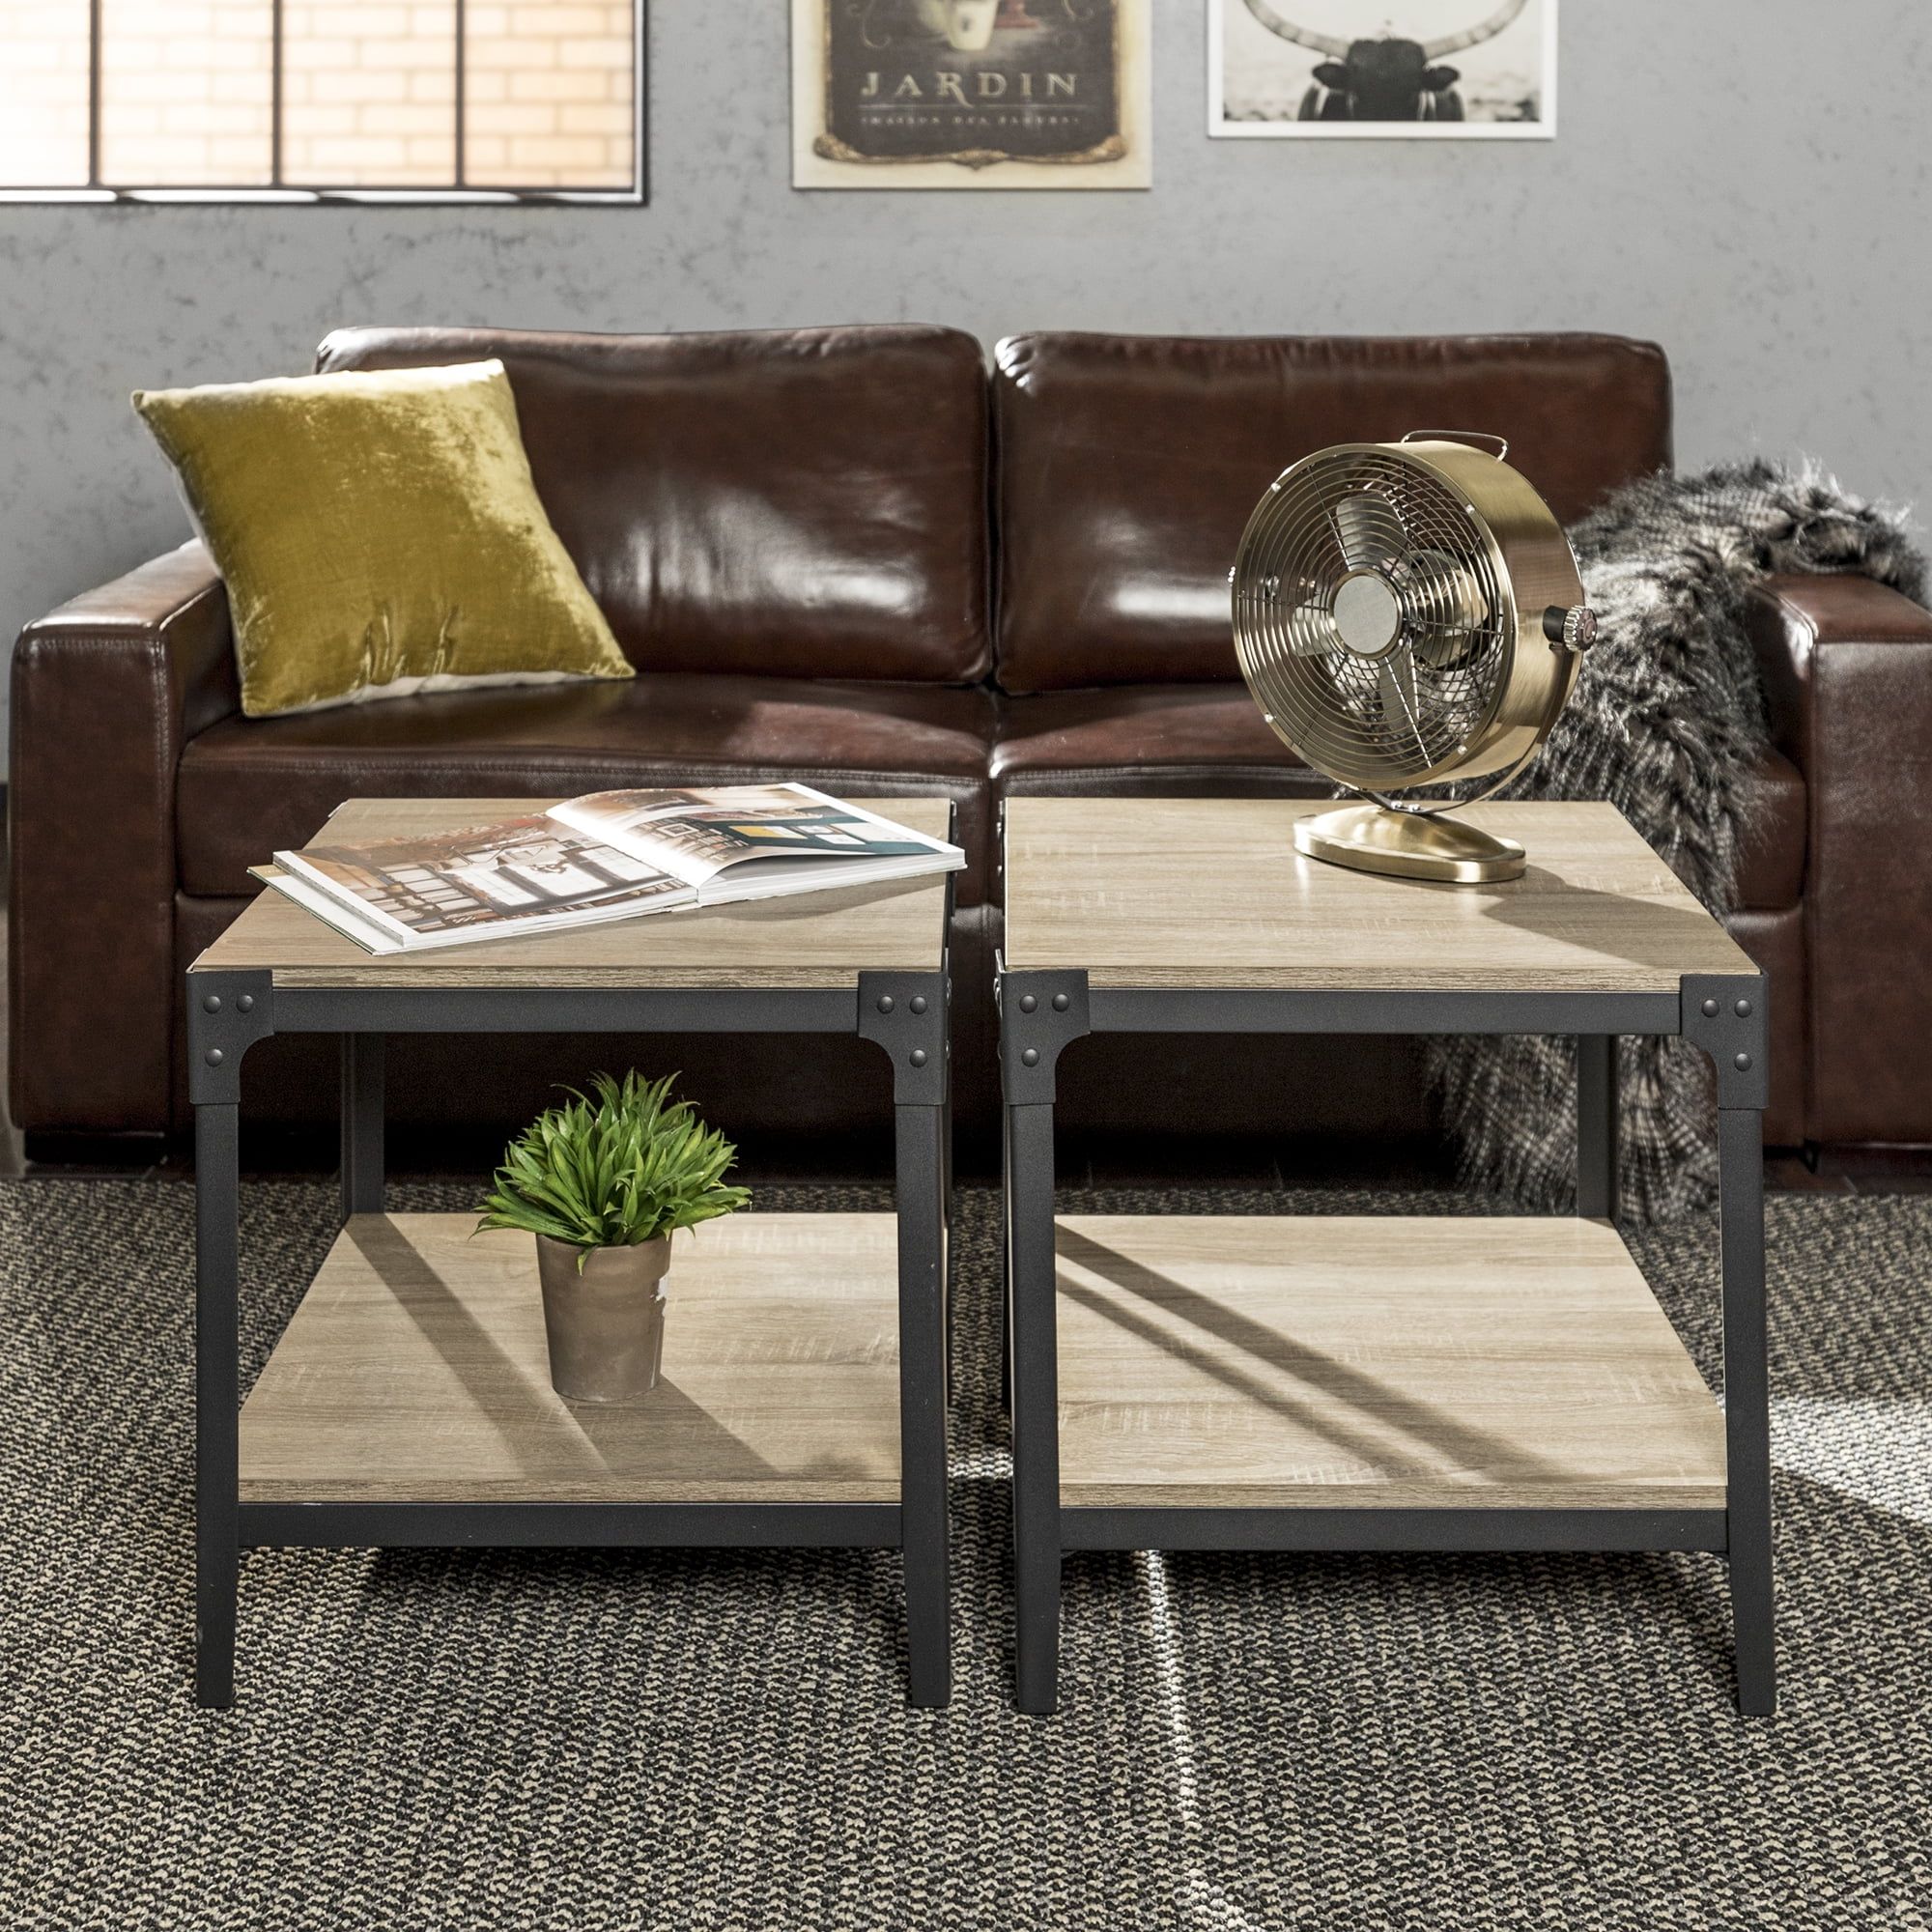 Woven Paths Wilson Riveted End Tables, Set Of 2, Driftwood – Walmart Throughout Woven Paths Coffee Tables (View 15 of 20)